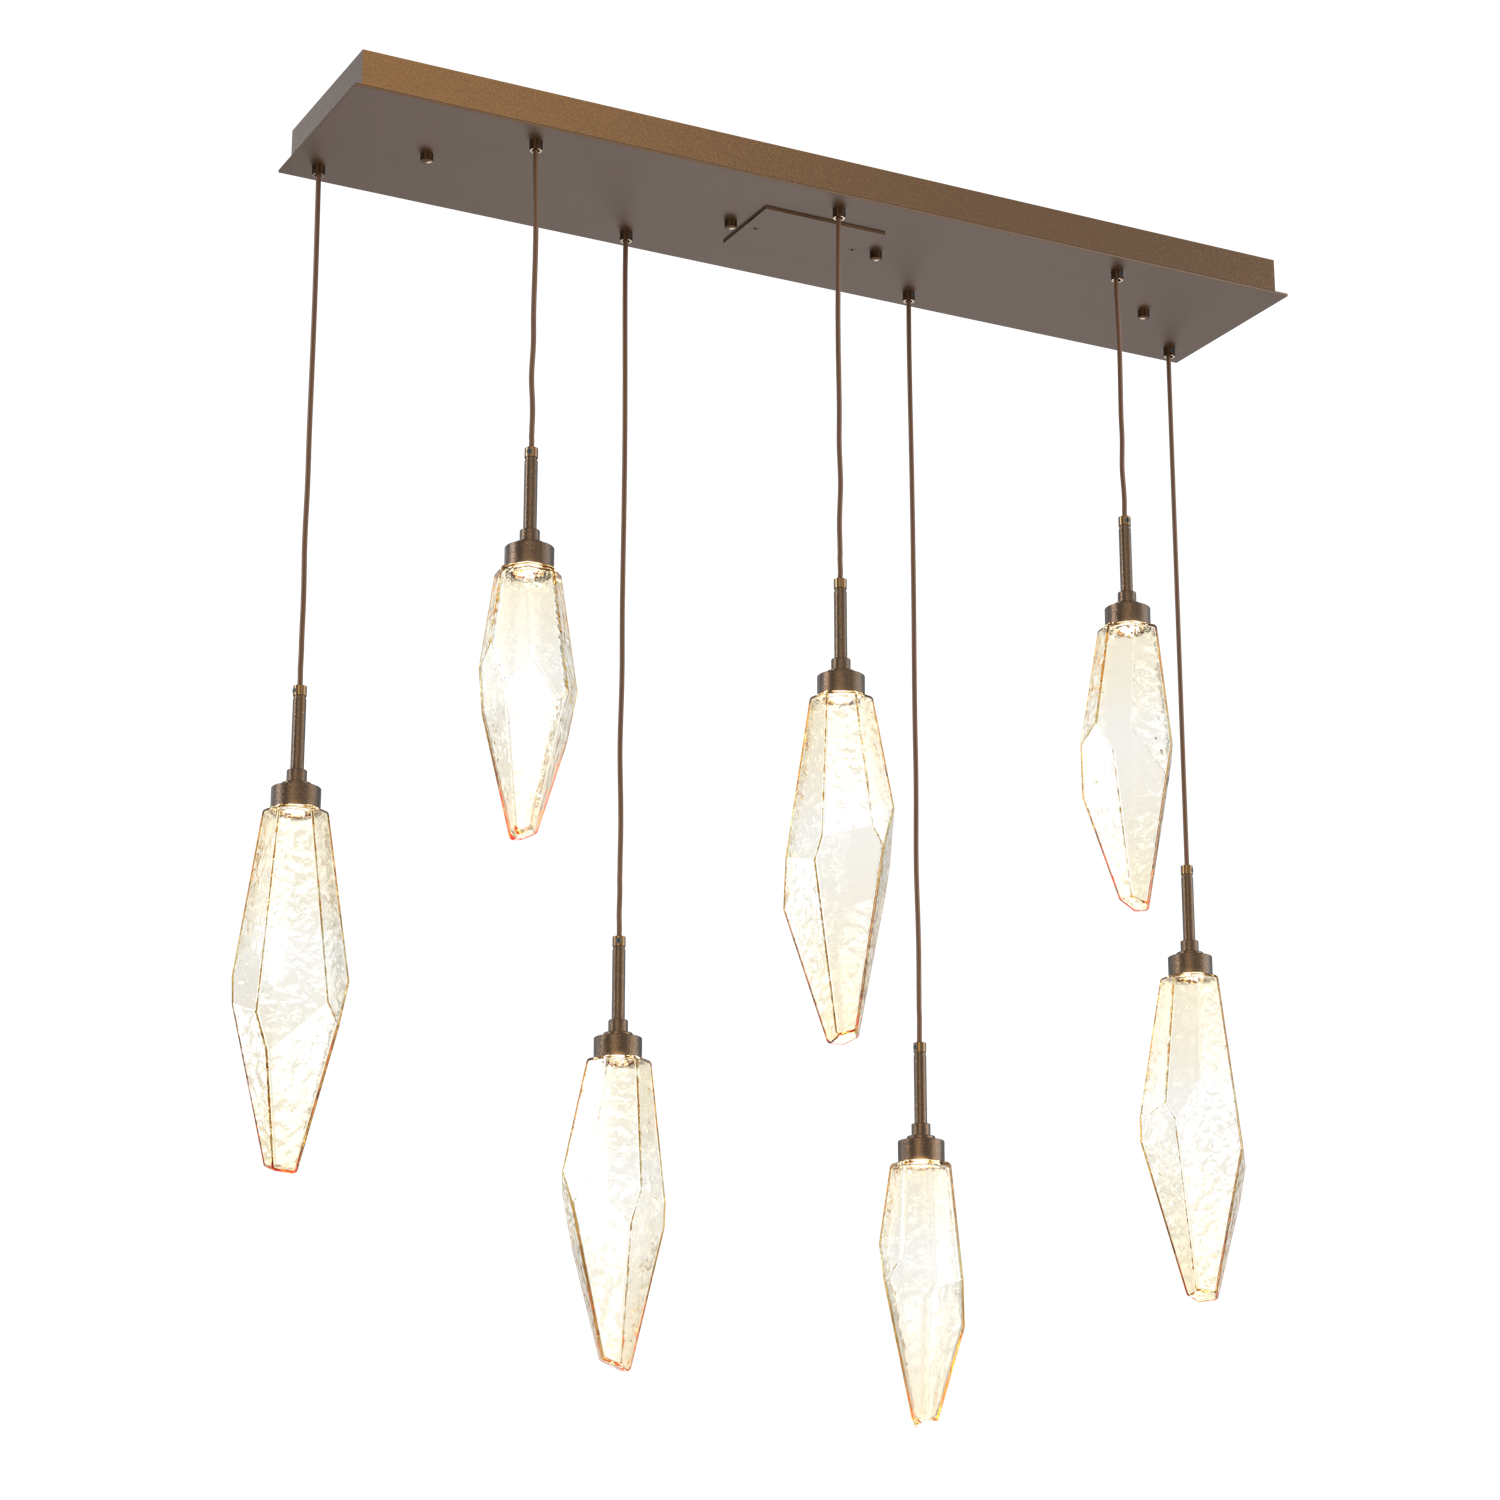 PLB0050-07-FB-CA-Hammerton-Studio-Rock-Crystal-7-light-linear-pendant-chandelier-with-flat-bronze-finish-and-chilled-amber-blown-glass-shades-and-LED-lamping